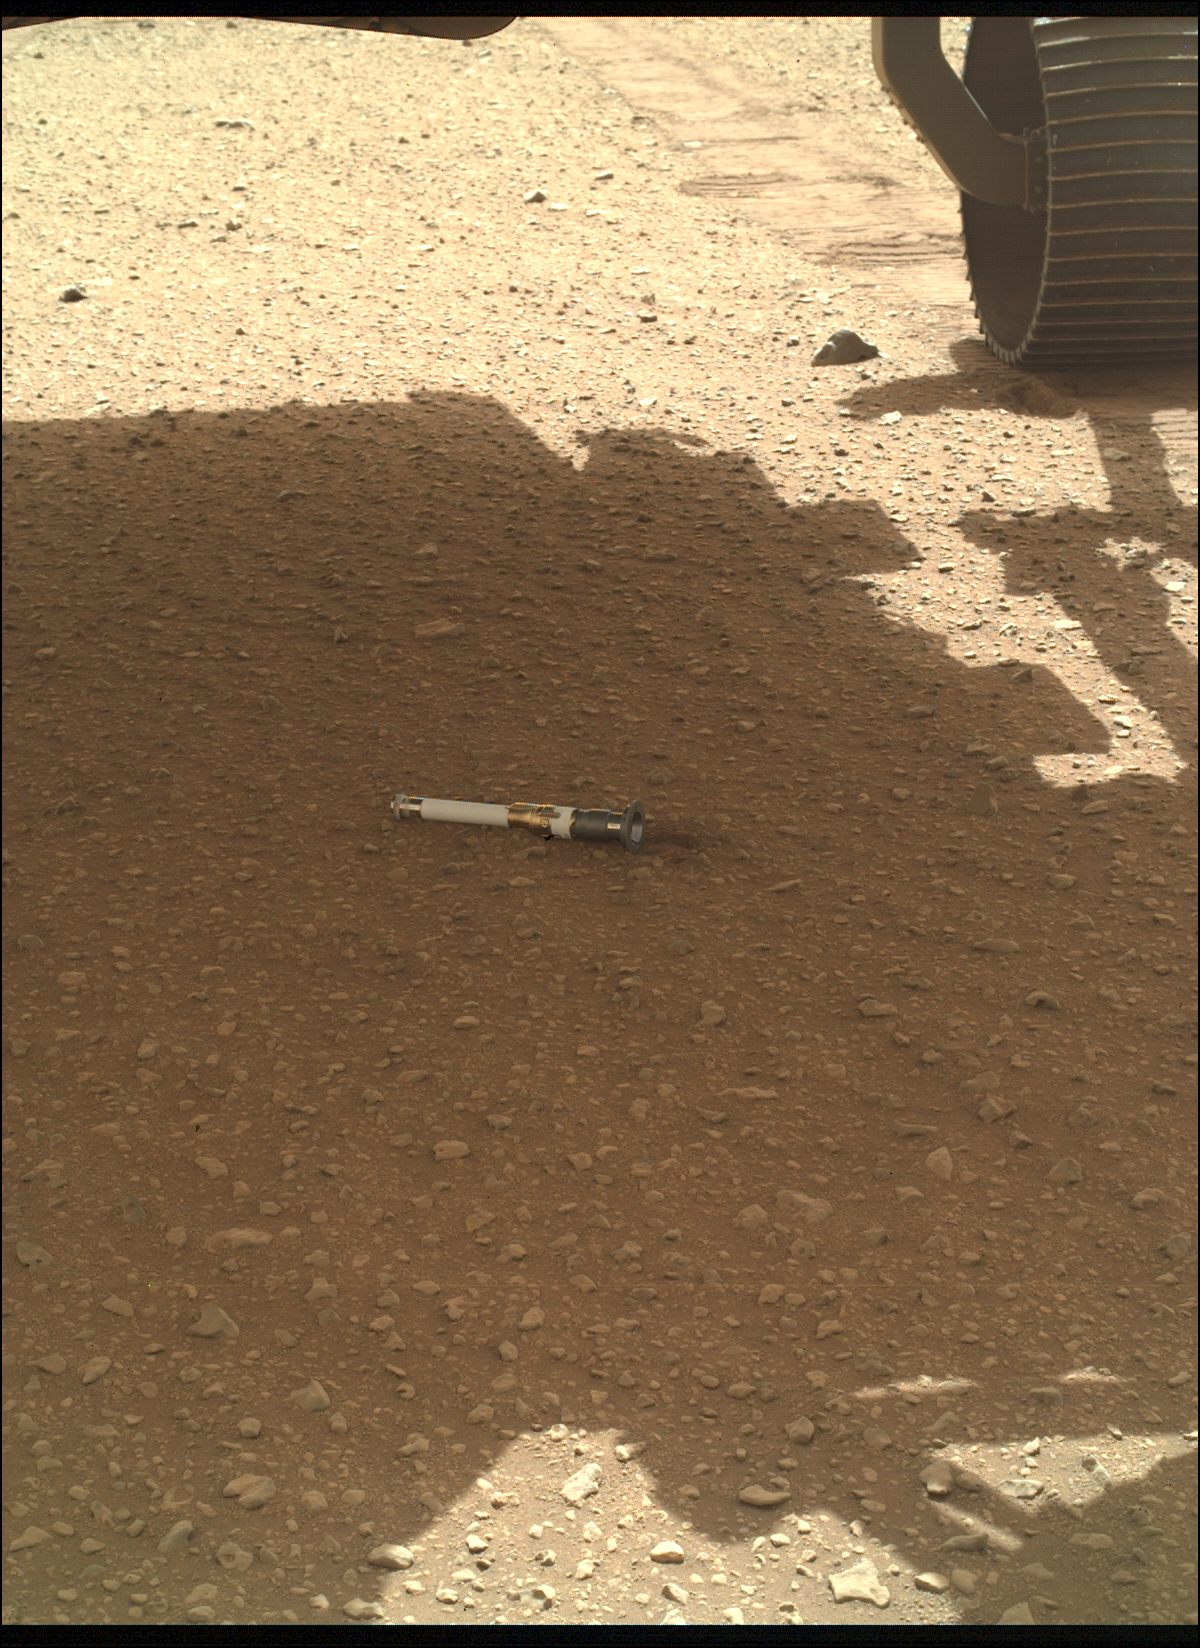 mars sand with a tube on top.  The rover's wheels are just visible